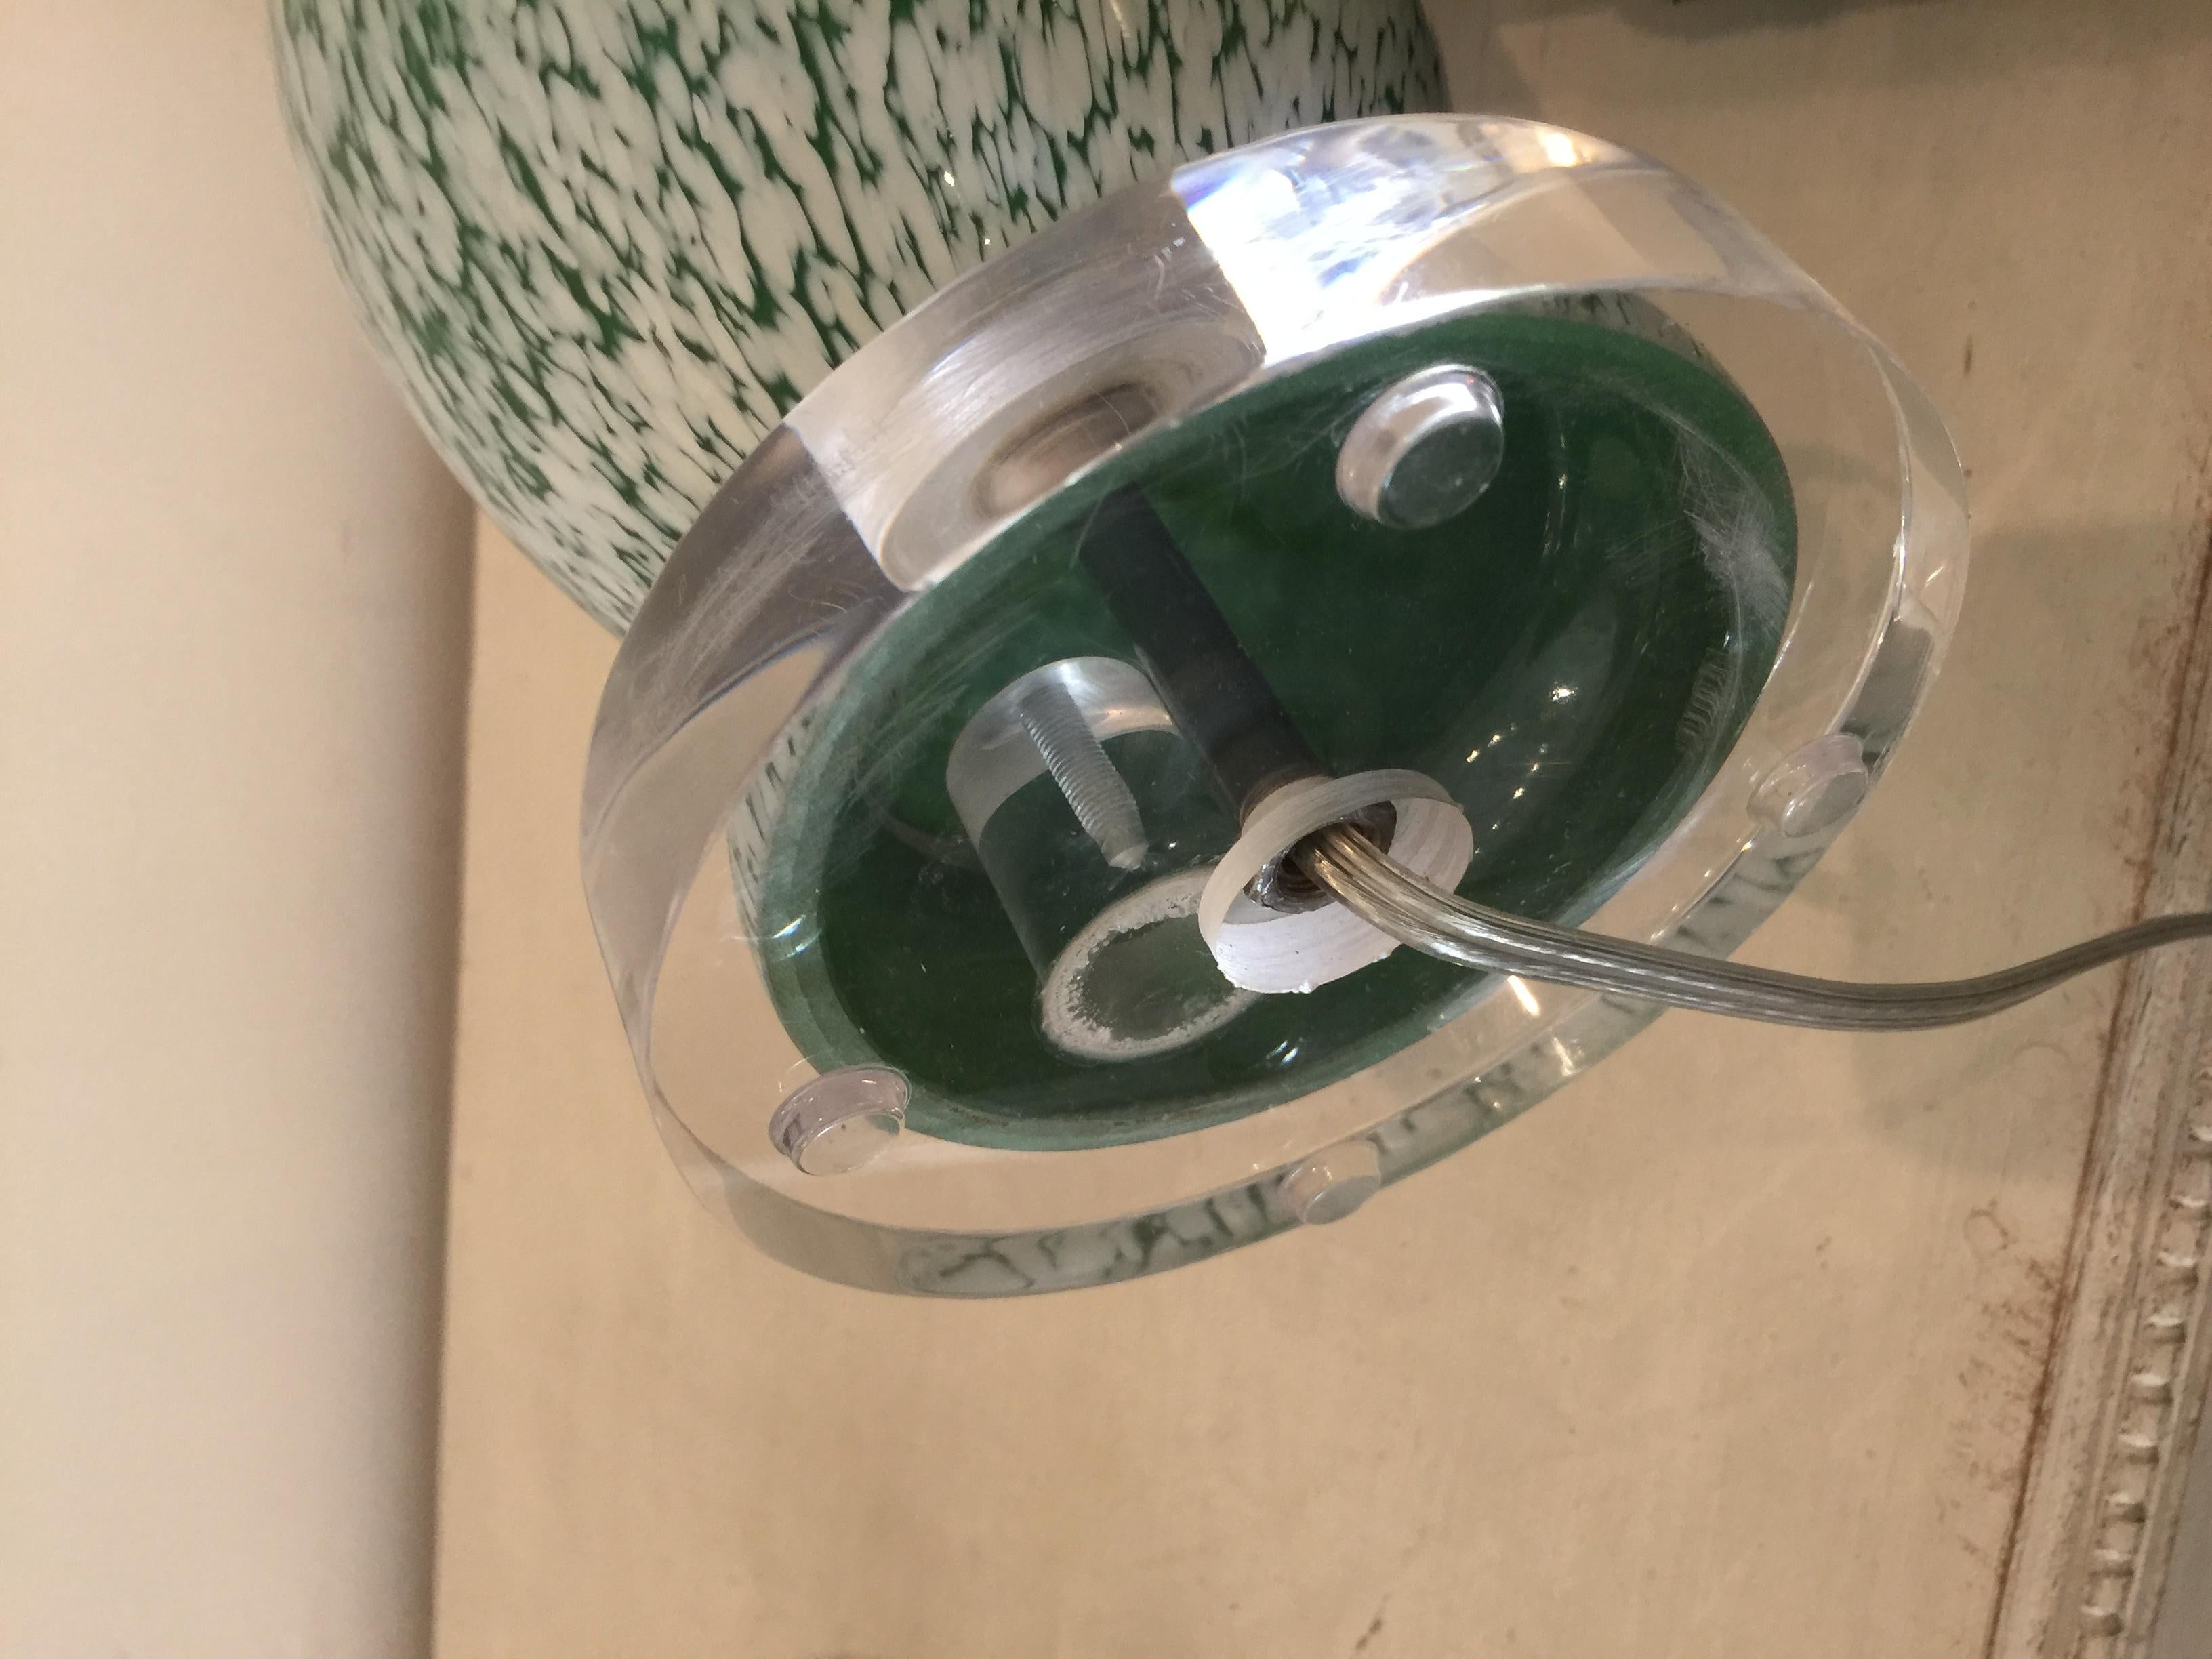 Pair of vintage green and white glass table lamps.
Made in France. Sit level and sturdy on clear Lucite bases.
Rewired to U.S. standards and can accommodate up to 150 watts. UL listed.

Measurements:
Height 21'' base to socket diameter 5''.